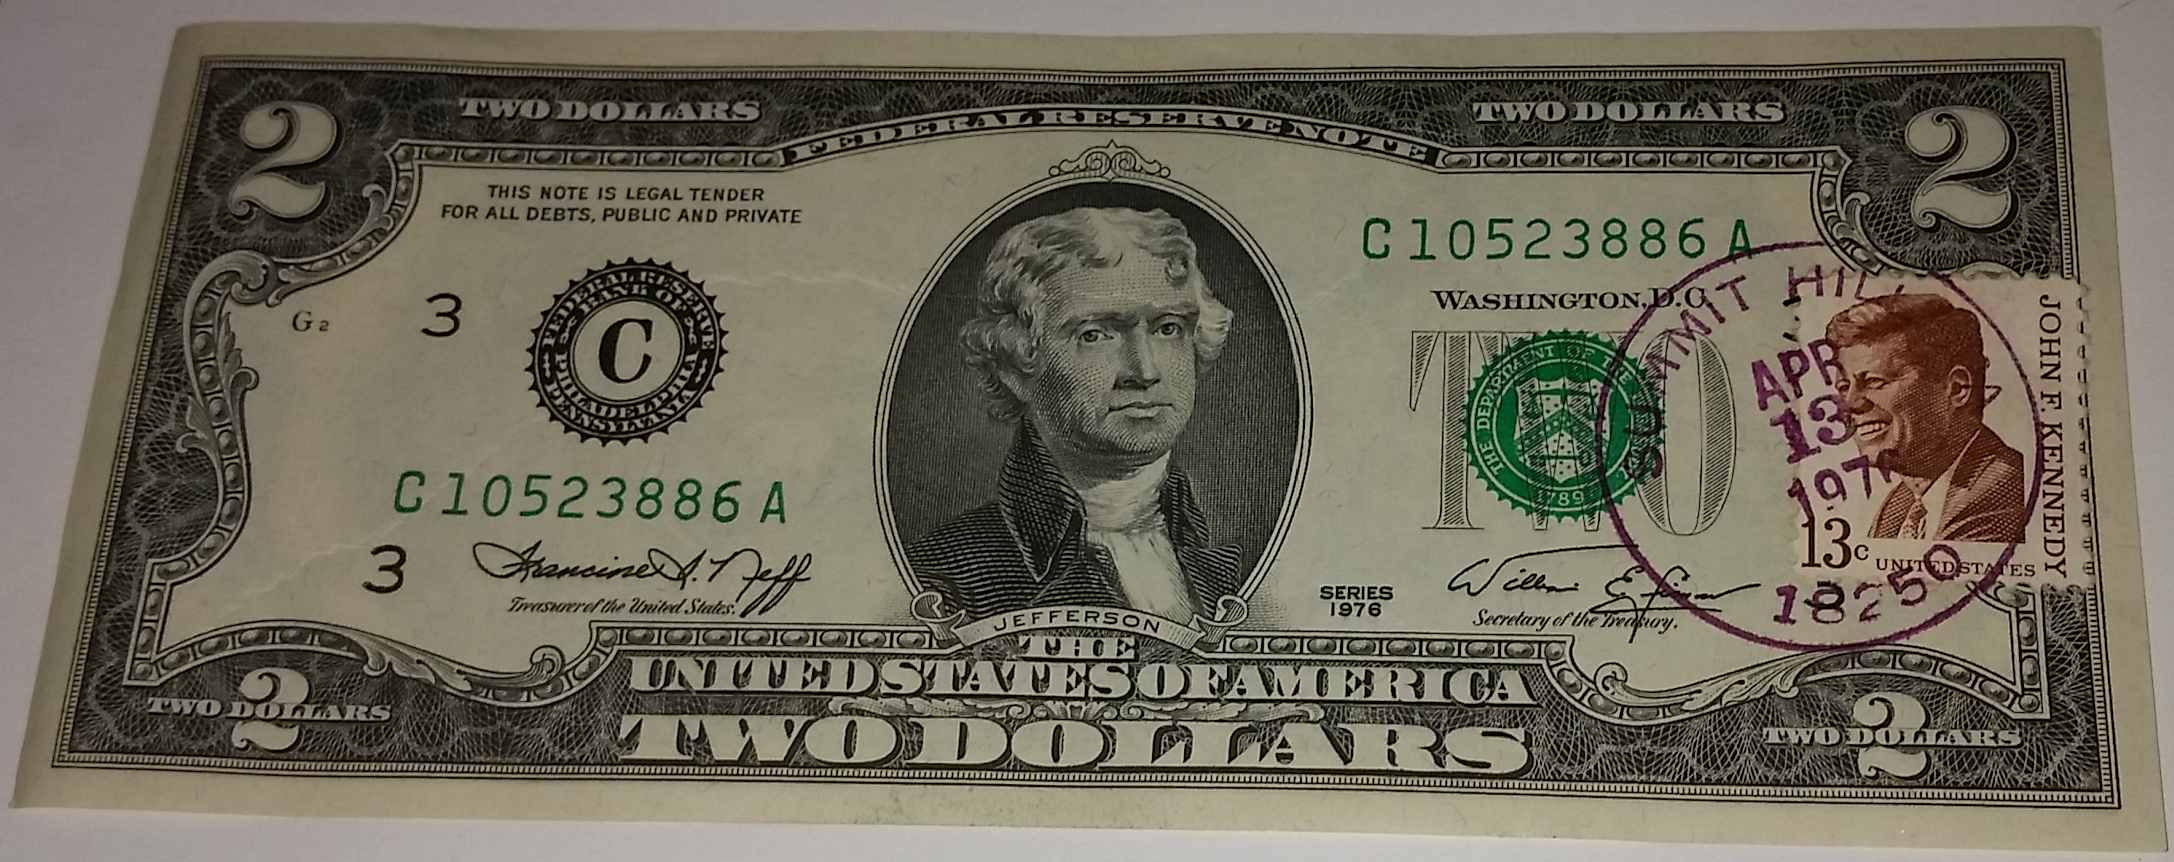 bicentennial star note lookup $2 bill search fancy serial numbers error banknote price guide